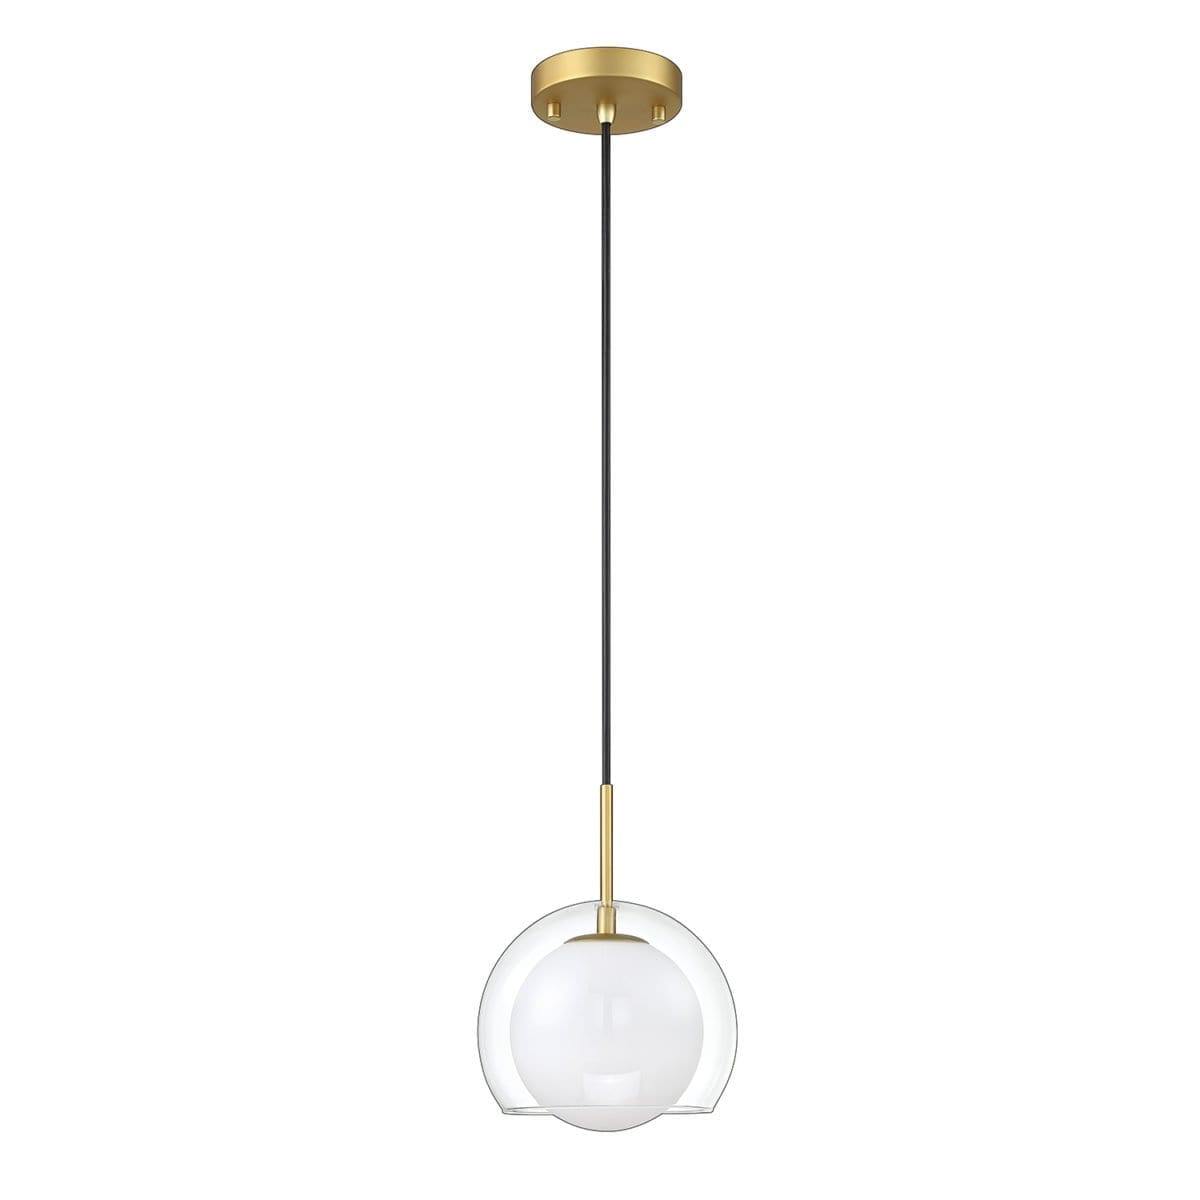 Black with Clear Shade and Frosted Globe Single Light Pendant - LV LIGHTING